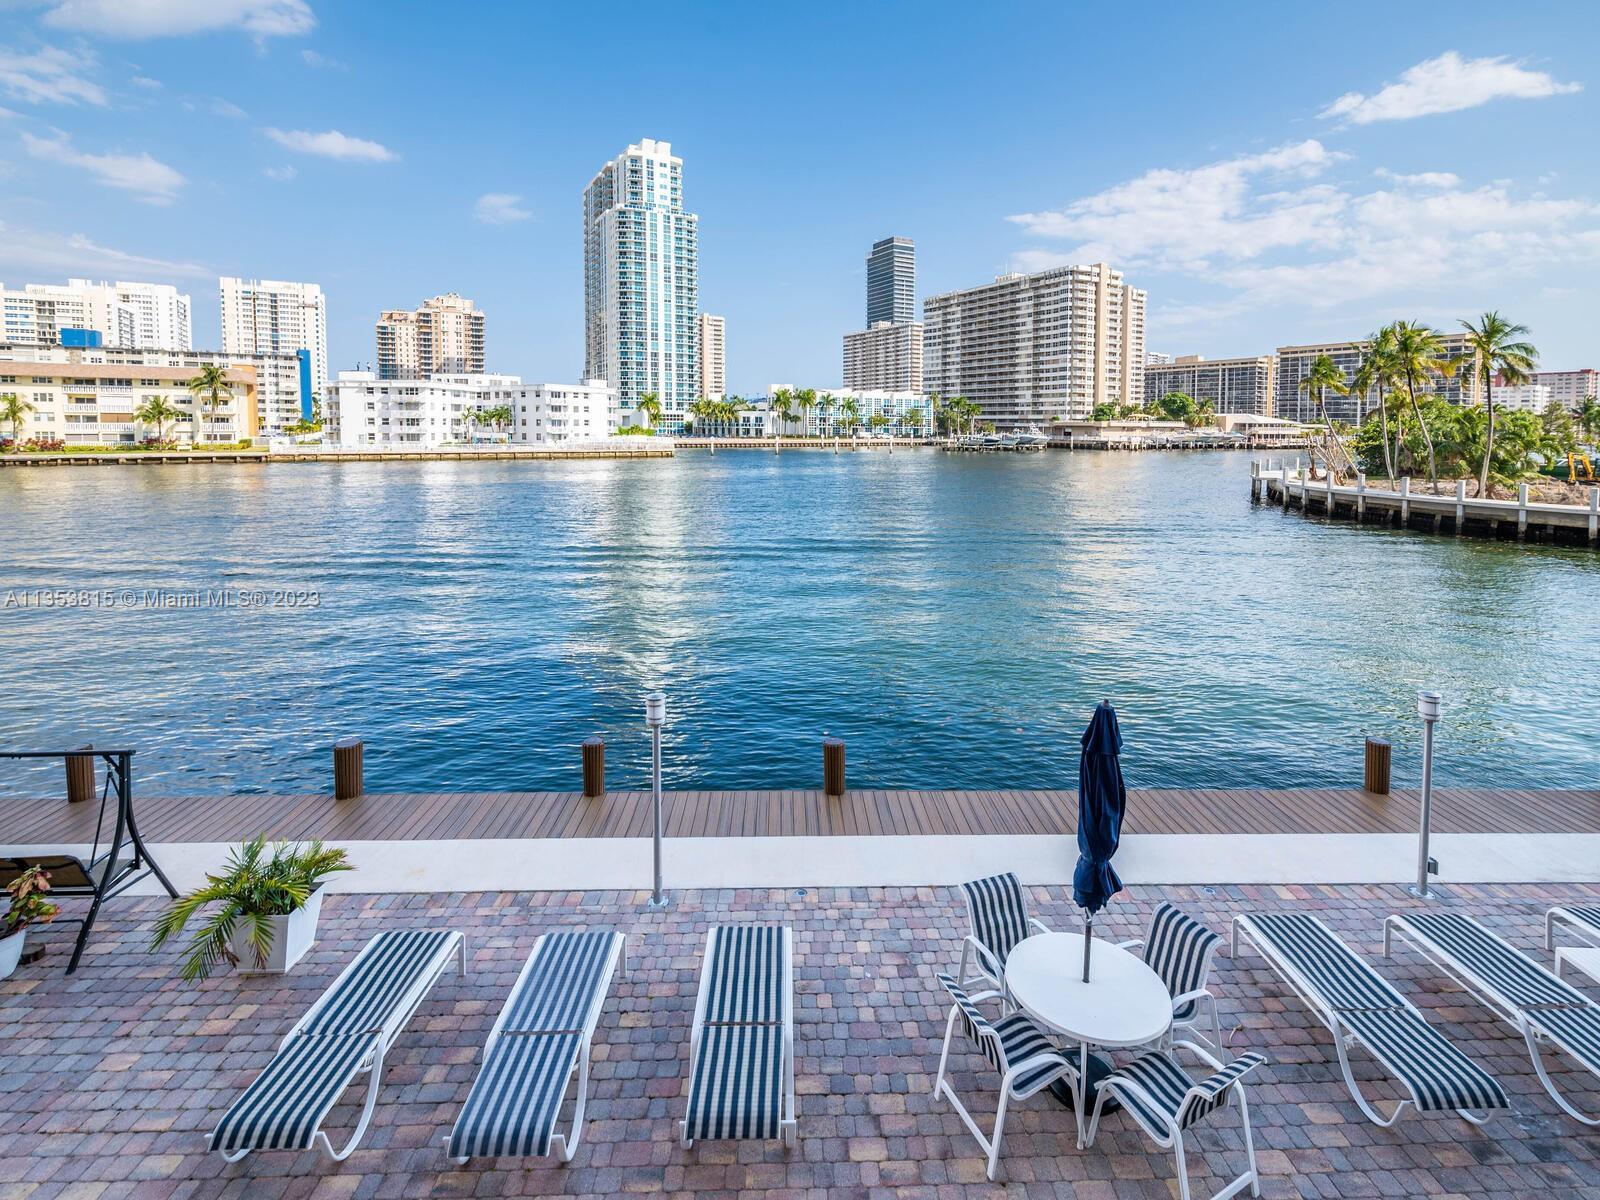 Live like you’re on vacation everyday with breathtaking panoramic intracoastal views! Beautiful turn